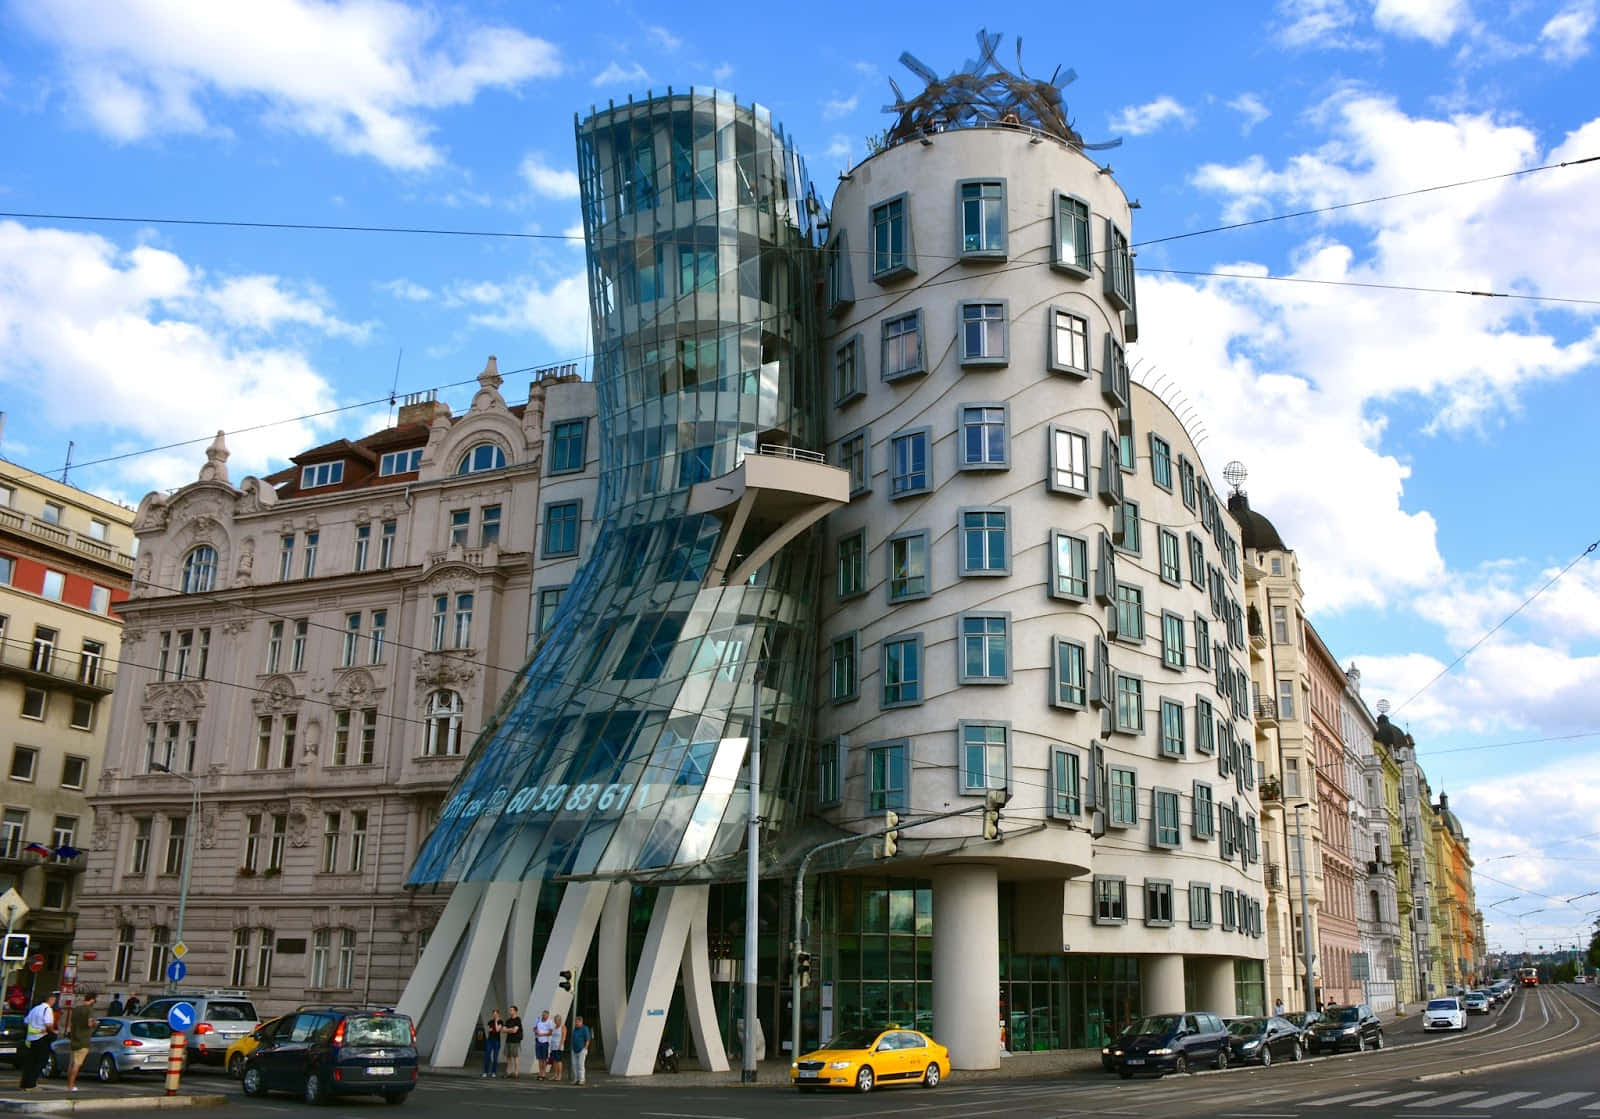 Cars Passing By Dancing House Wallpaper